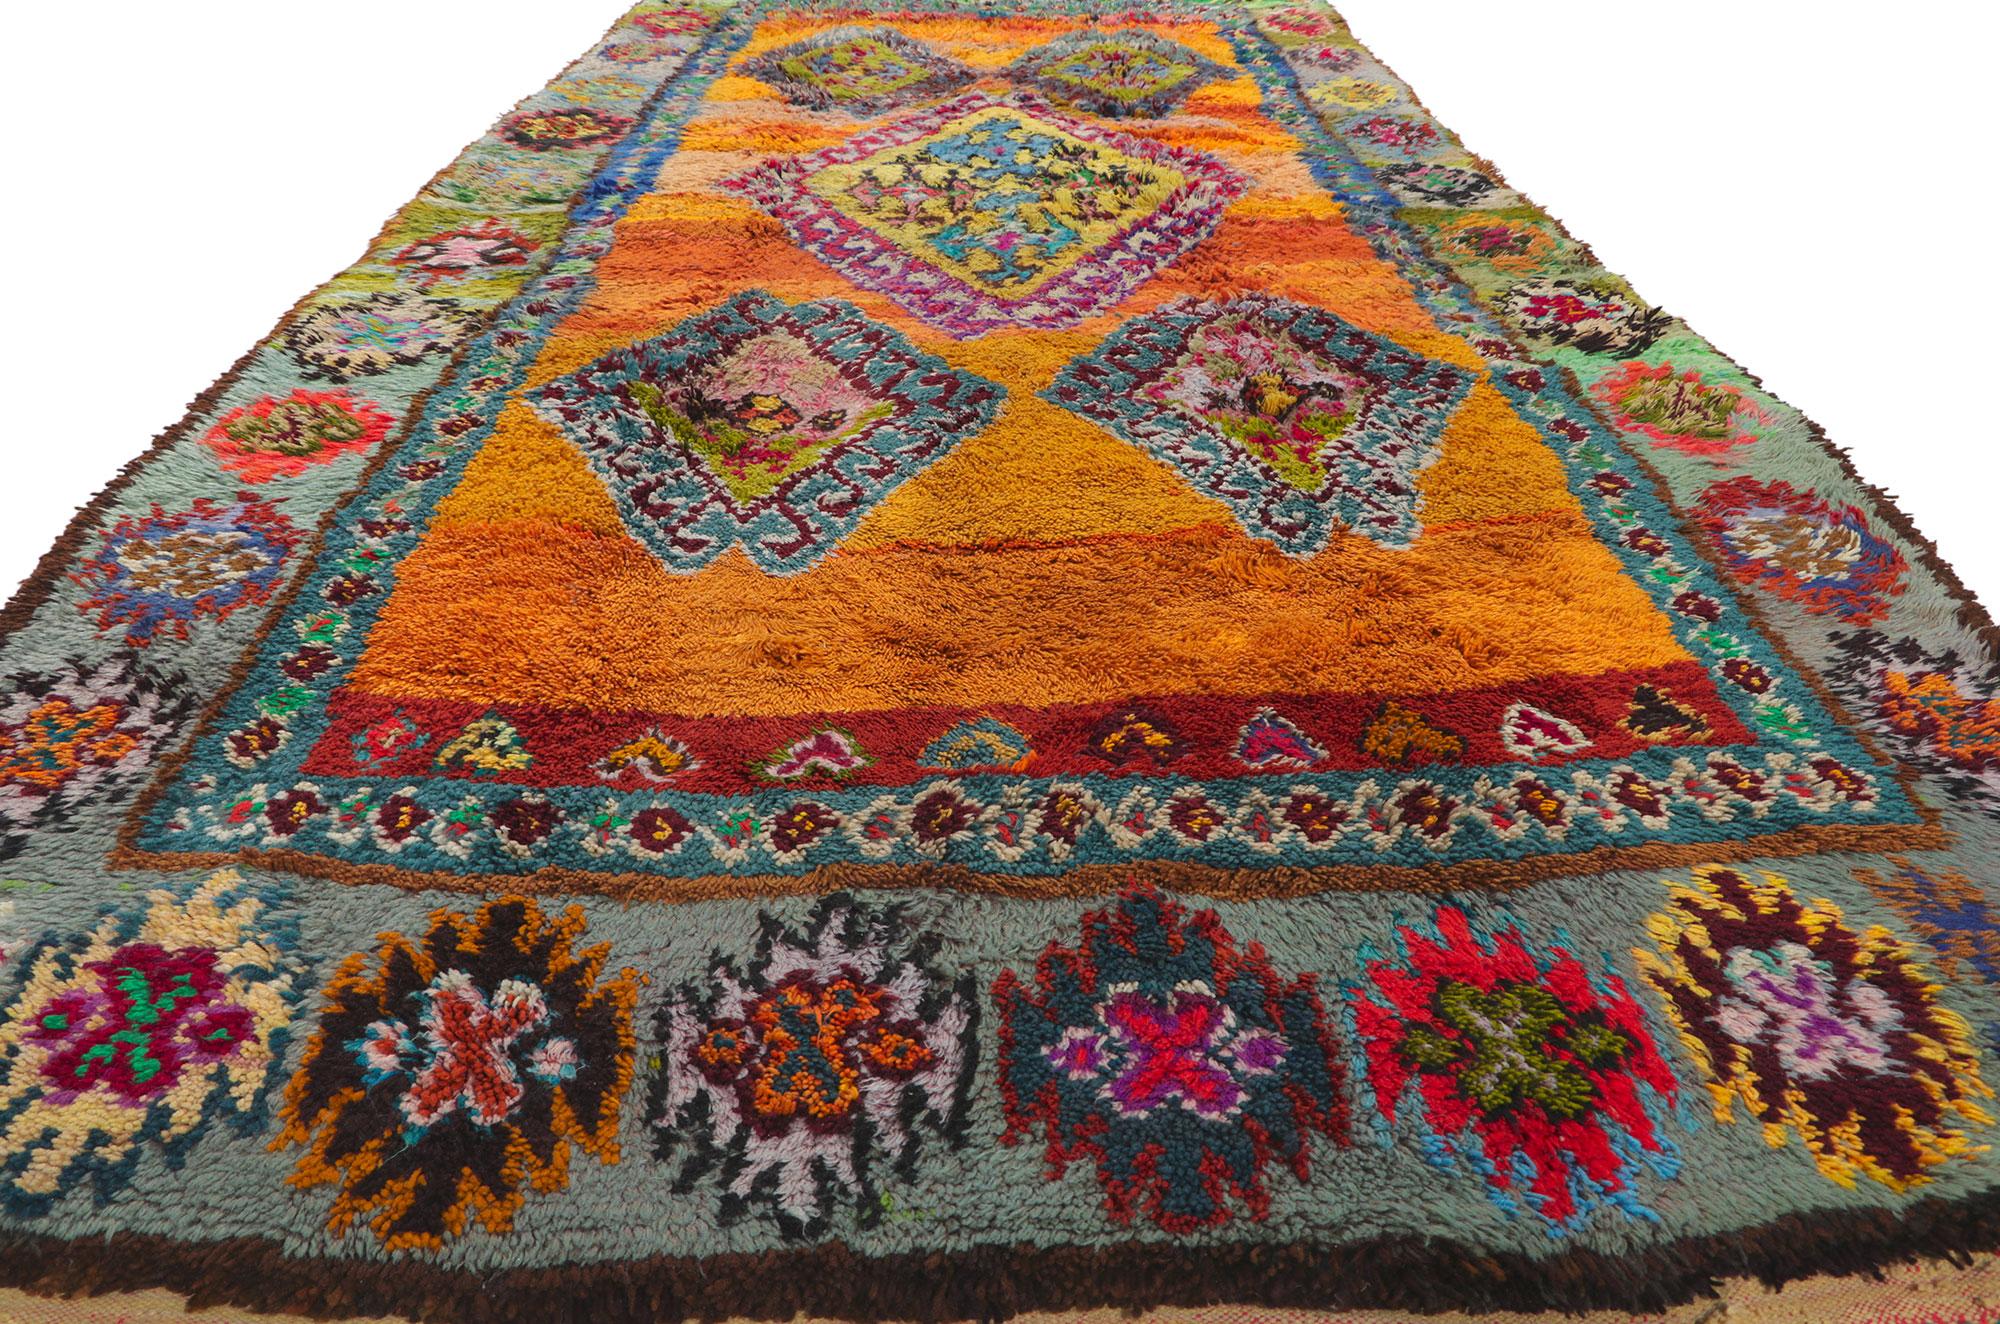 Vintage Berber Moroccan Boujad Rug with Tribal Bohemian Style In Good Condition For Sale In Dallas, TX